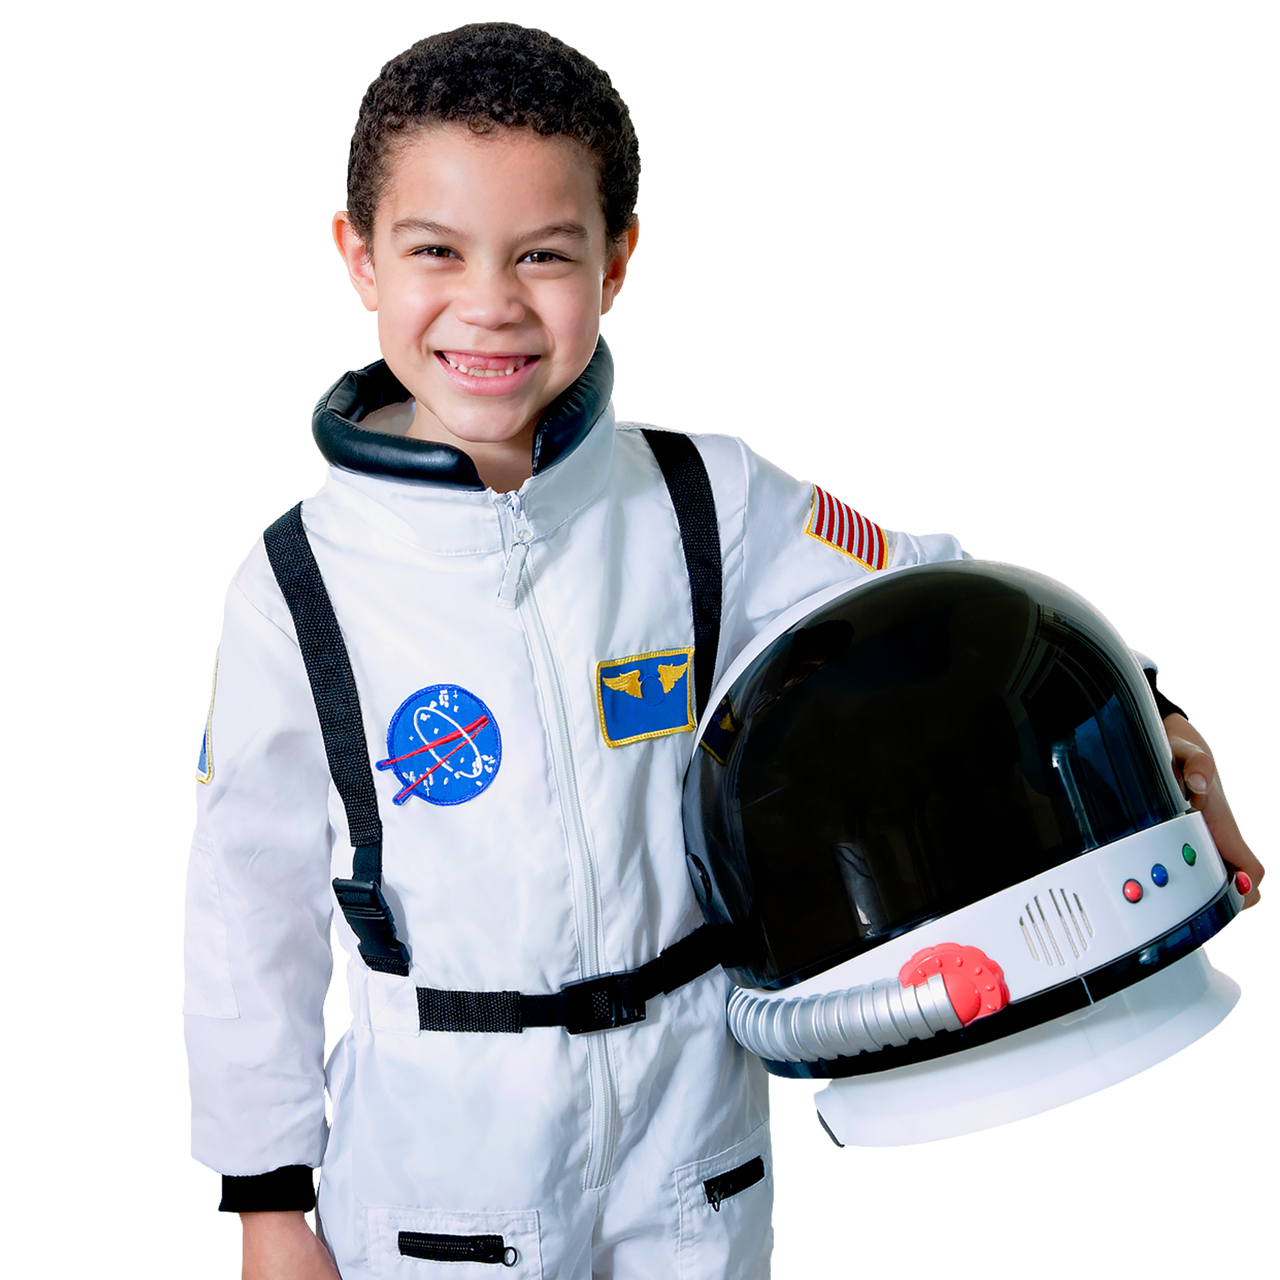 Kid wearing astronaut costume holding the helmet and smiling